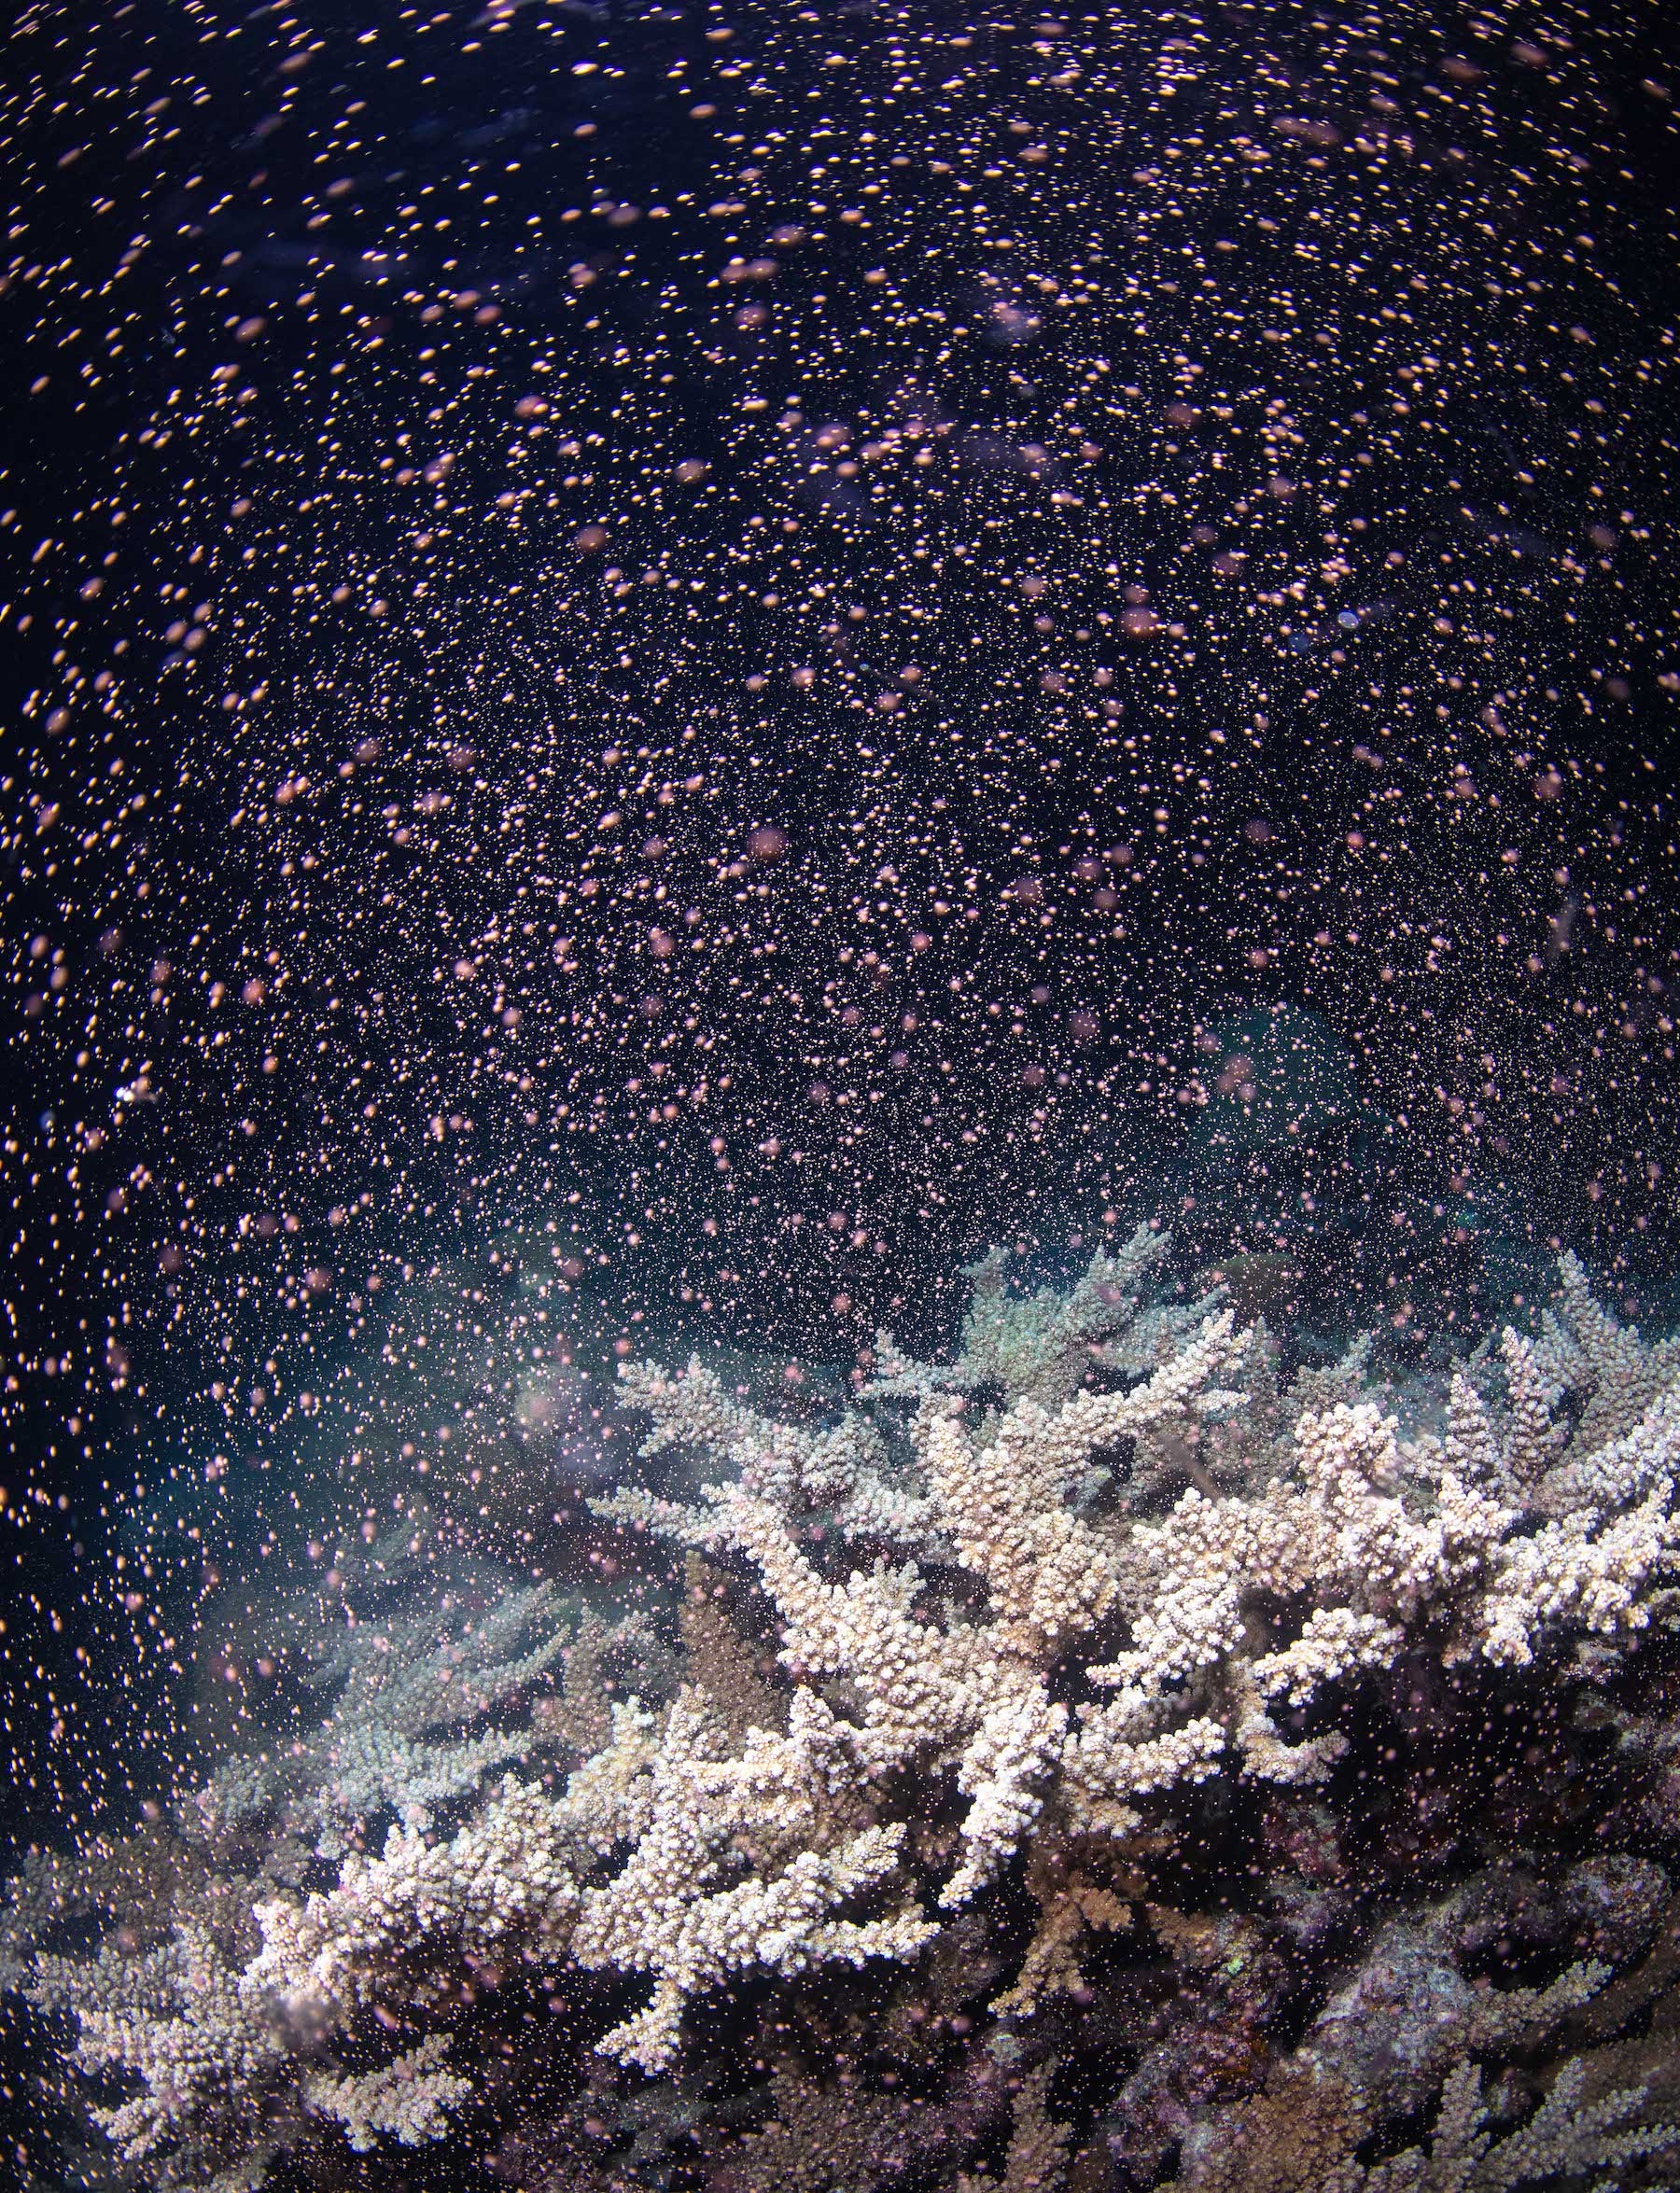 coral spawning clouding dark waters with small pink sphere bundles of sperm and eggs